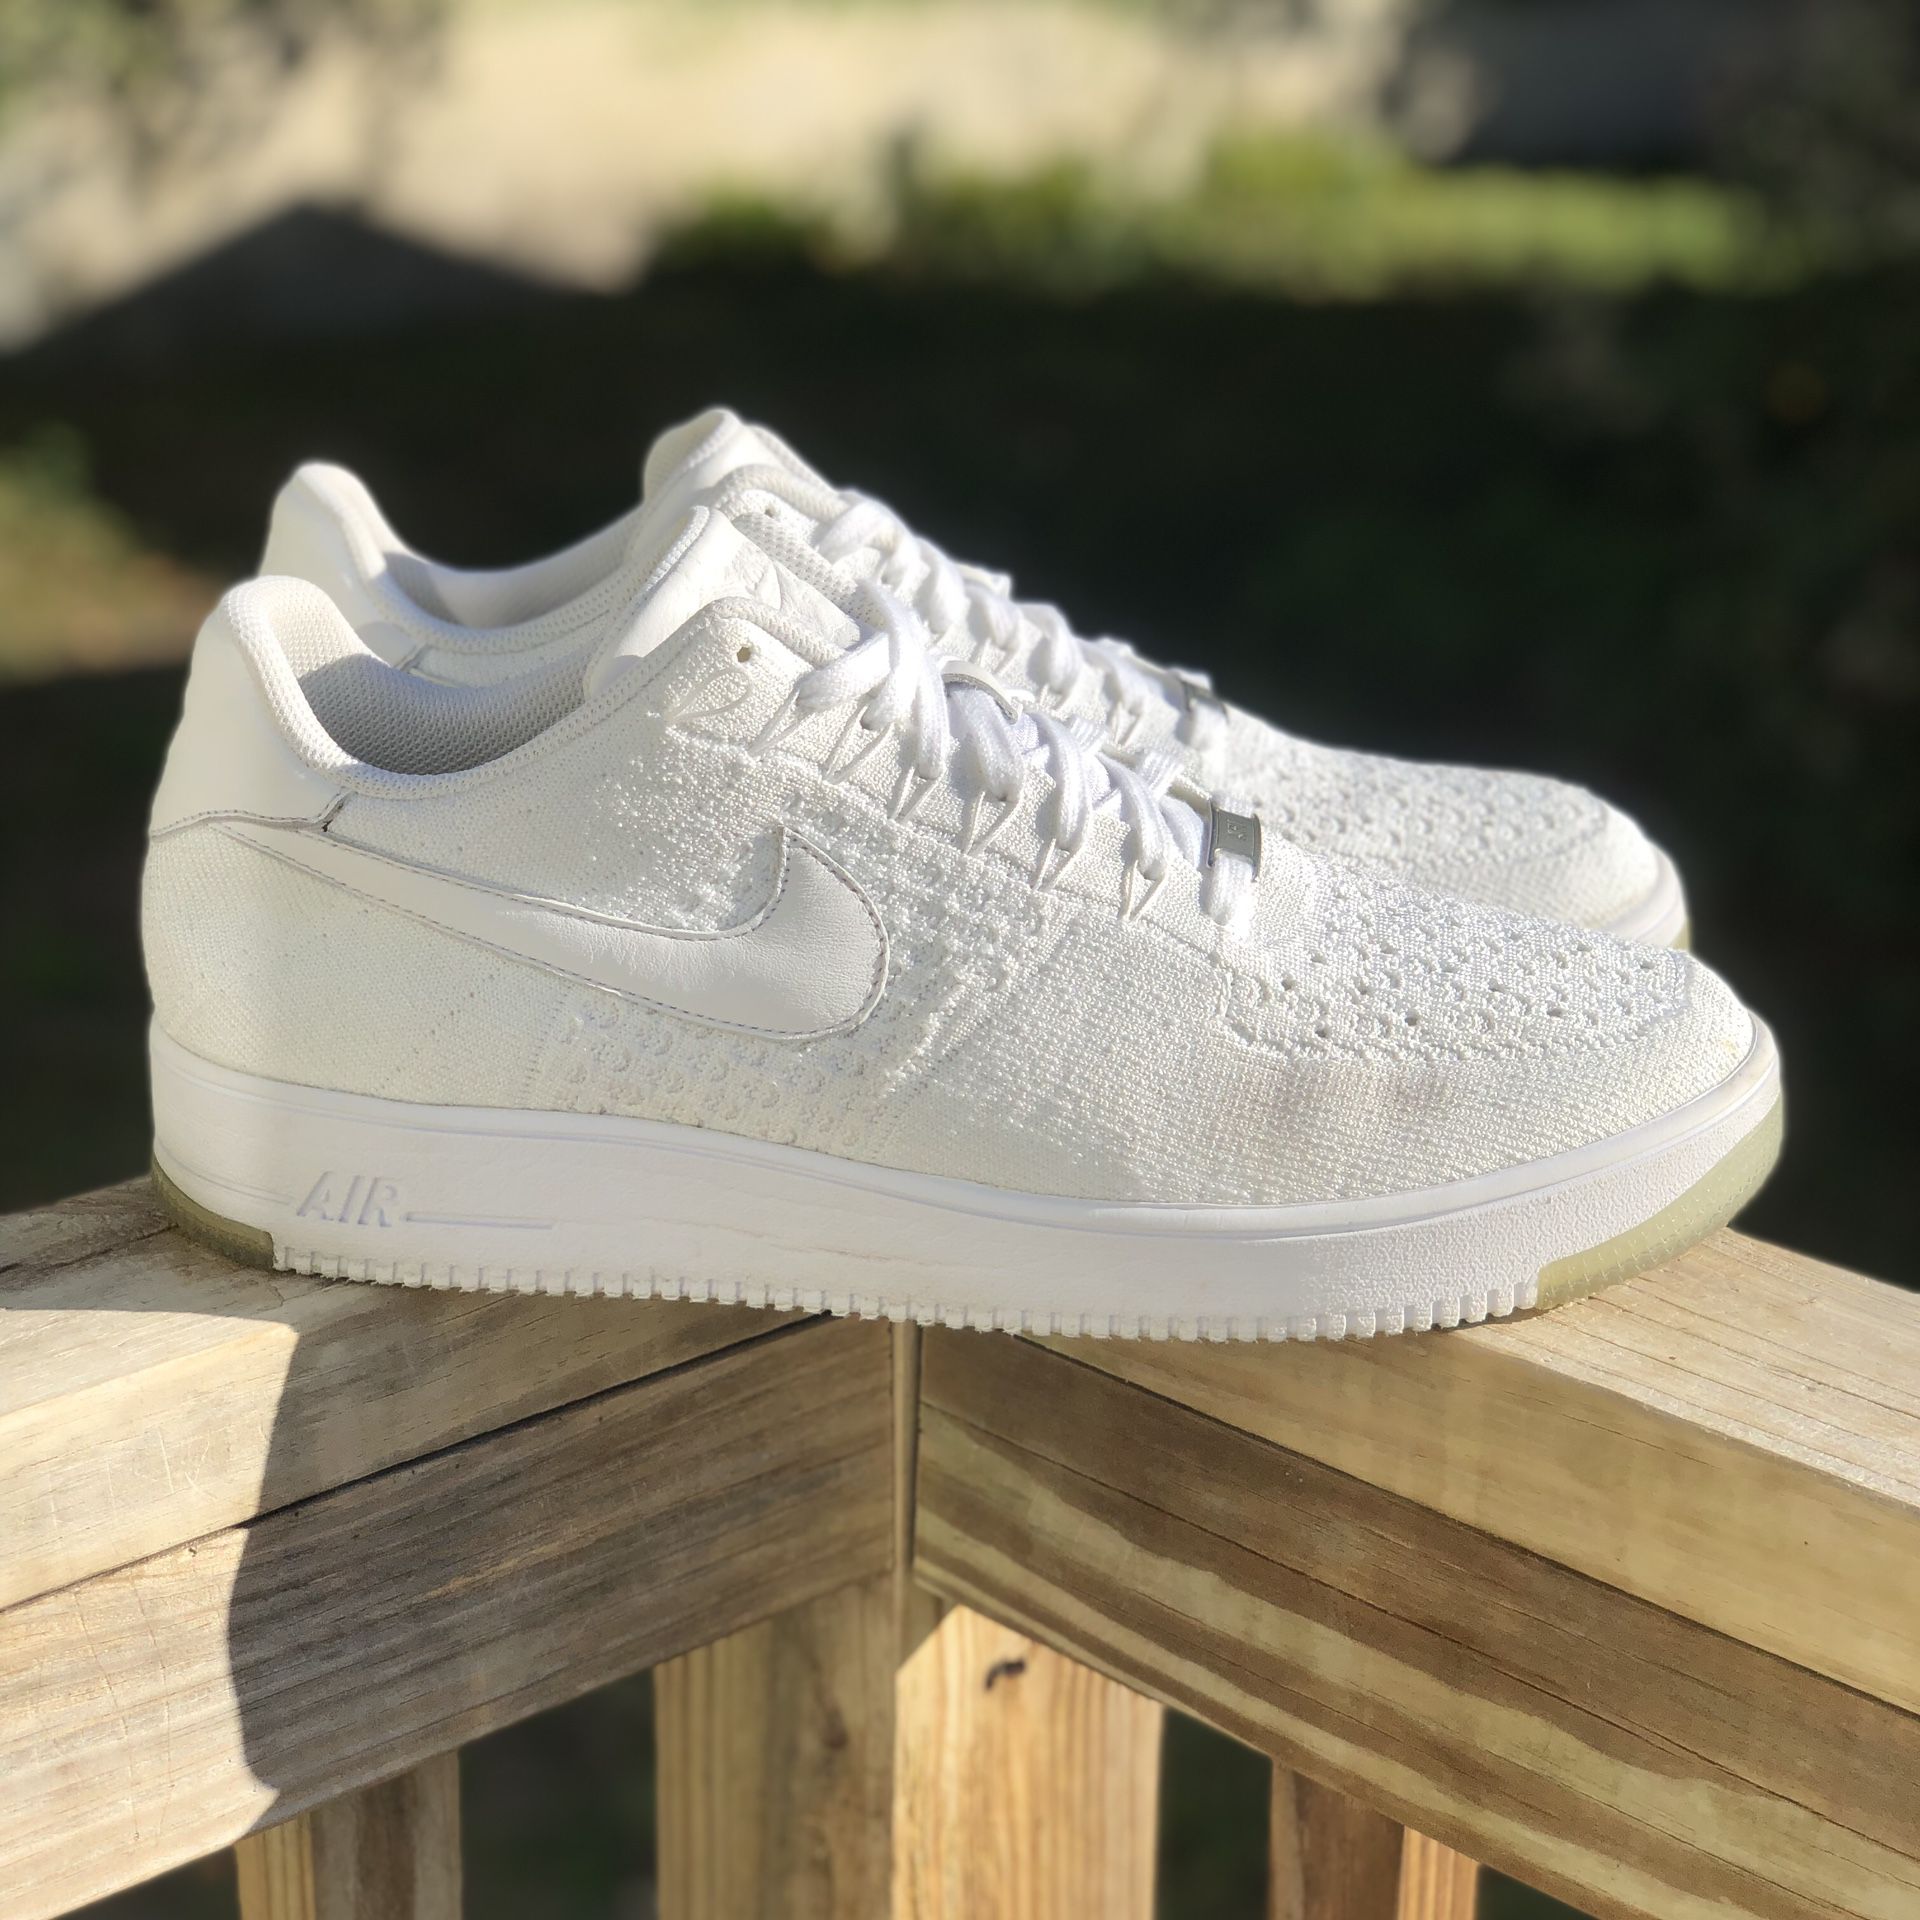 Magistraat prototype andere Nike Air Force One Ultra Flyknit - Mens Atheltic Shoes 817419-100 Mens Size  14 for Sale in Lutz, FL - OfferUp